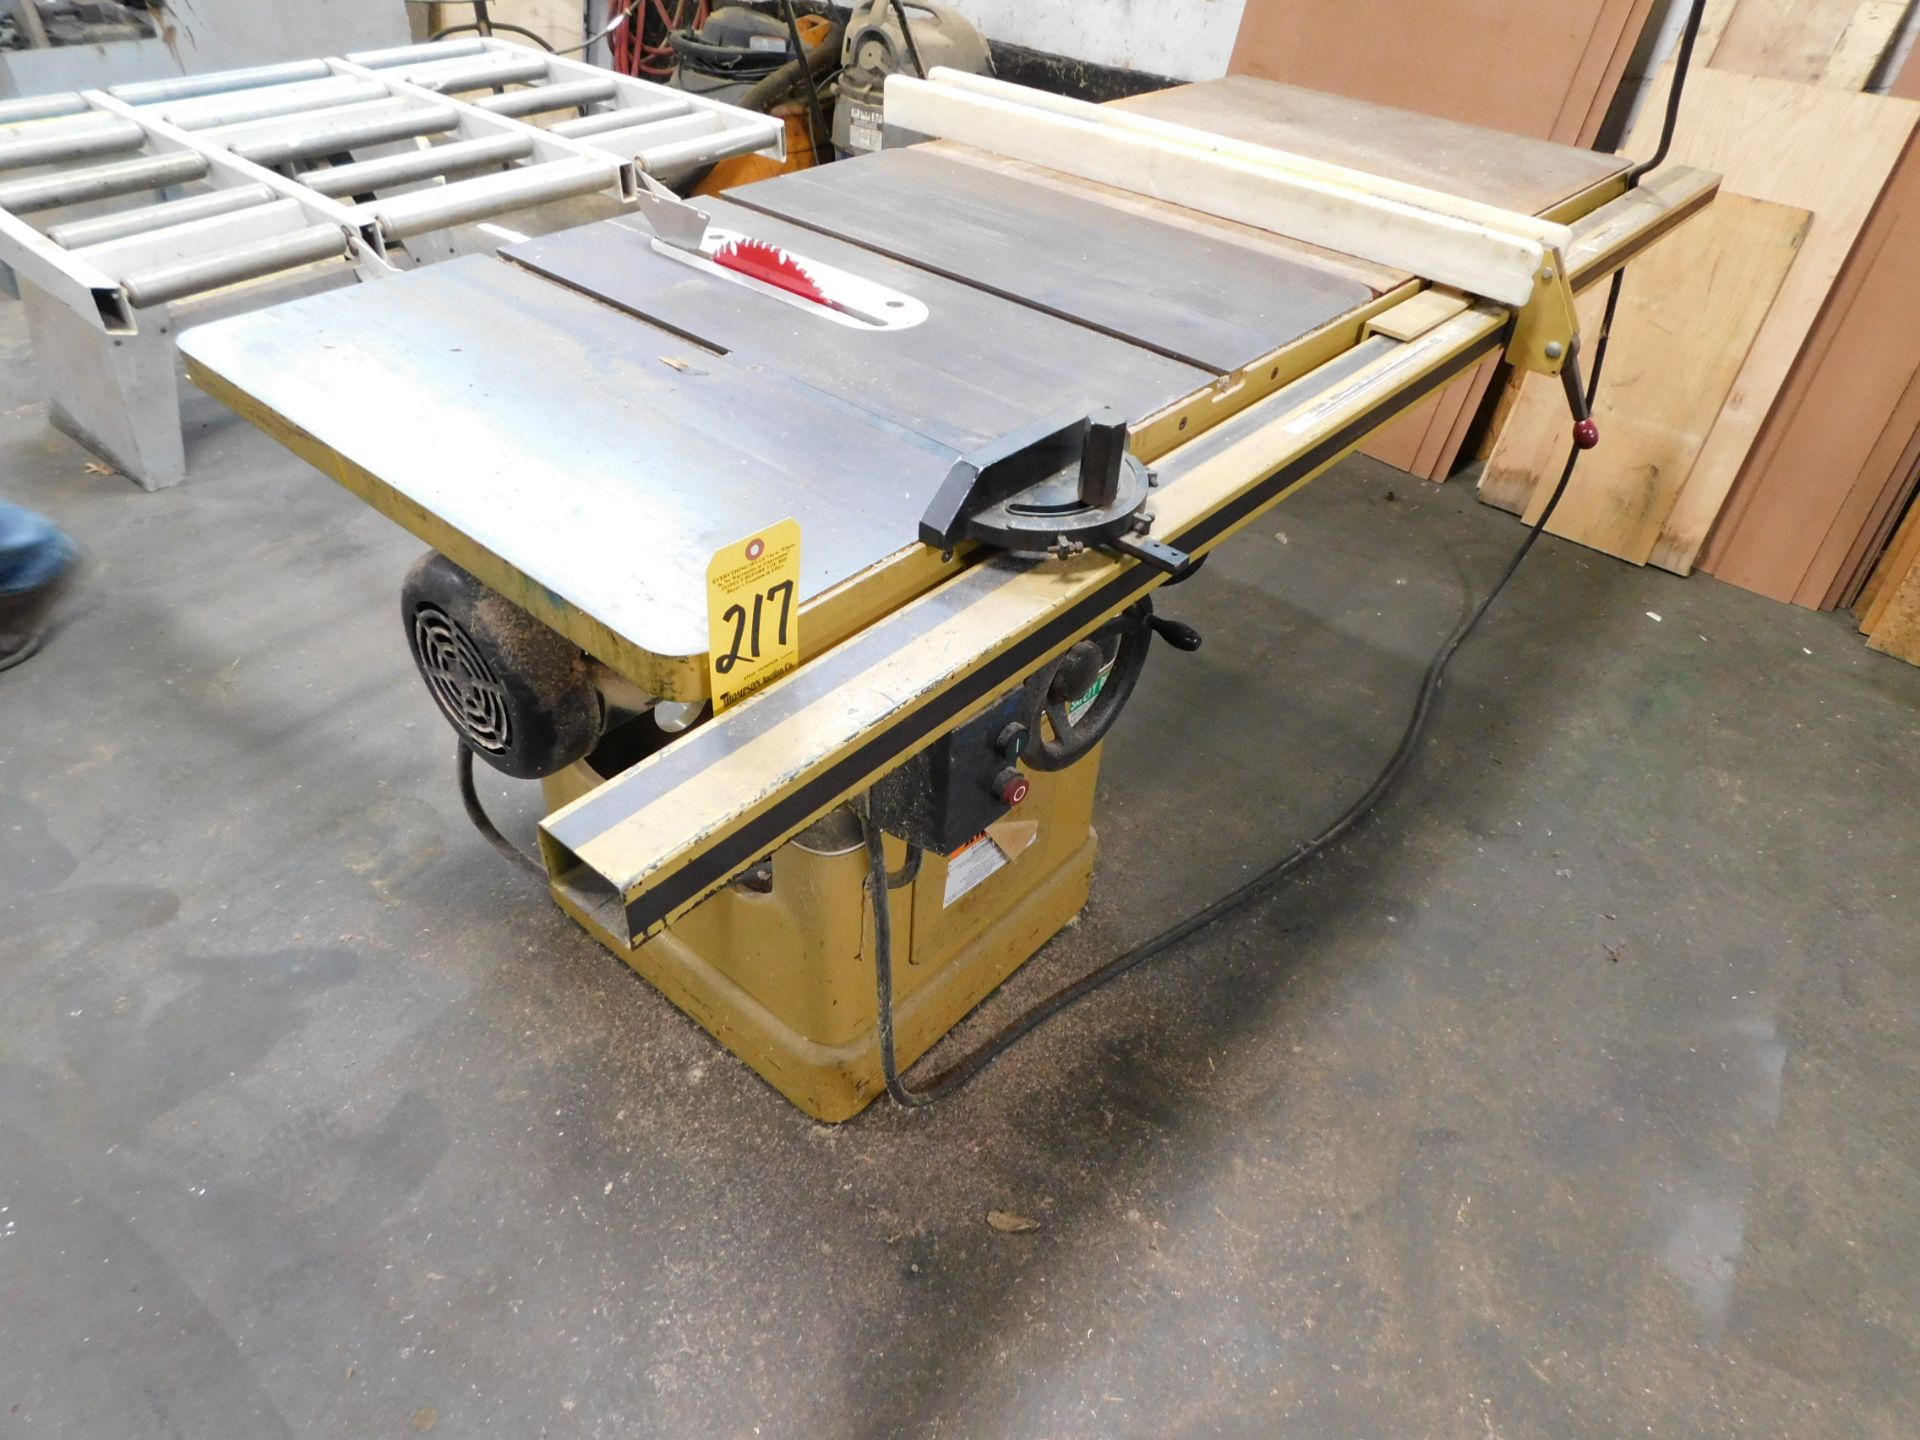 Powermatic Model 66, 10" Table Saw, s/n 93662581, with Fence and Miter Gauge, Loading Fee $100.00